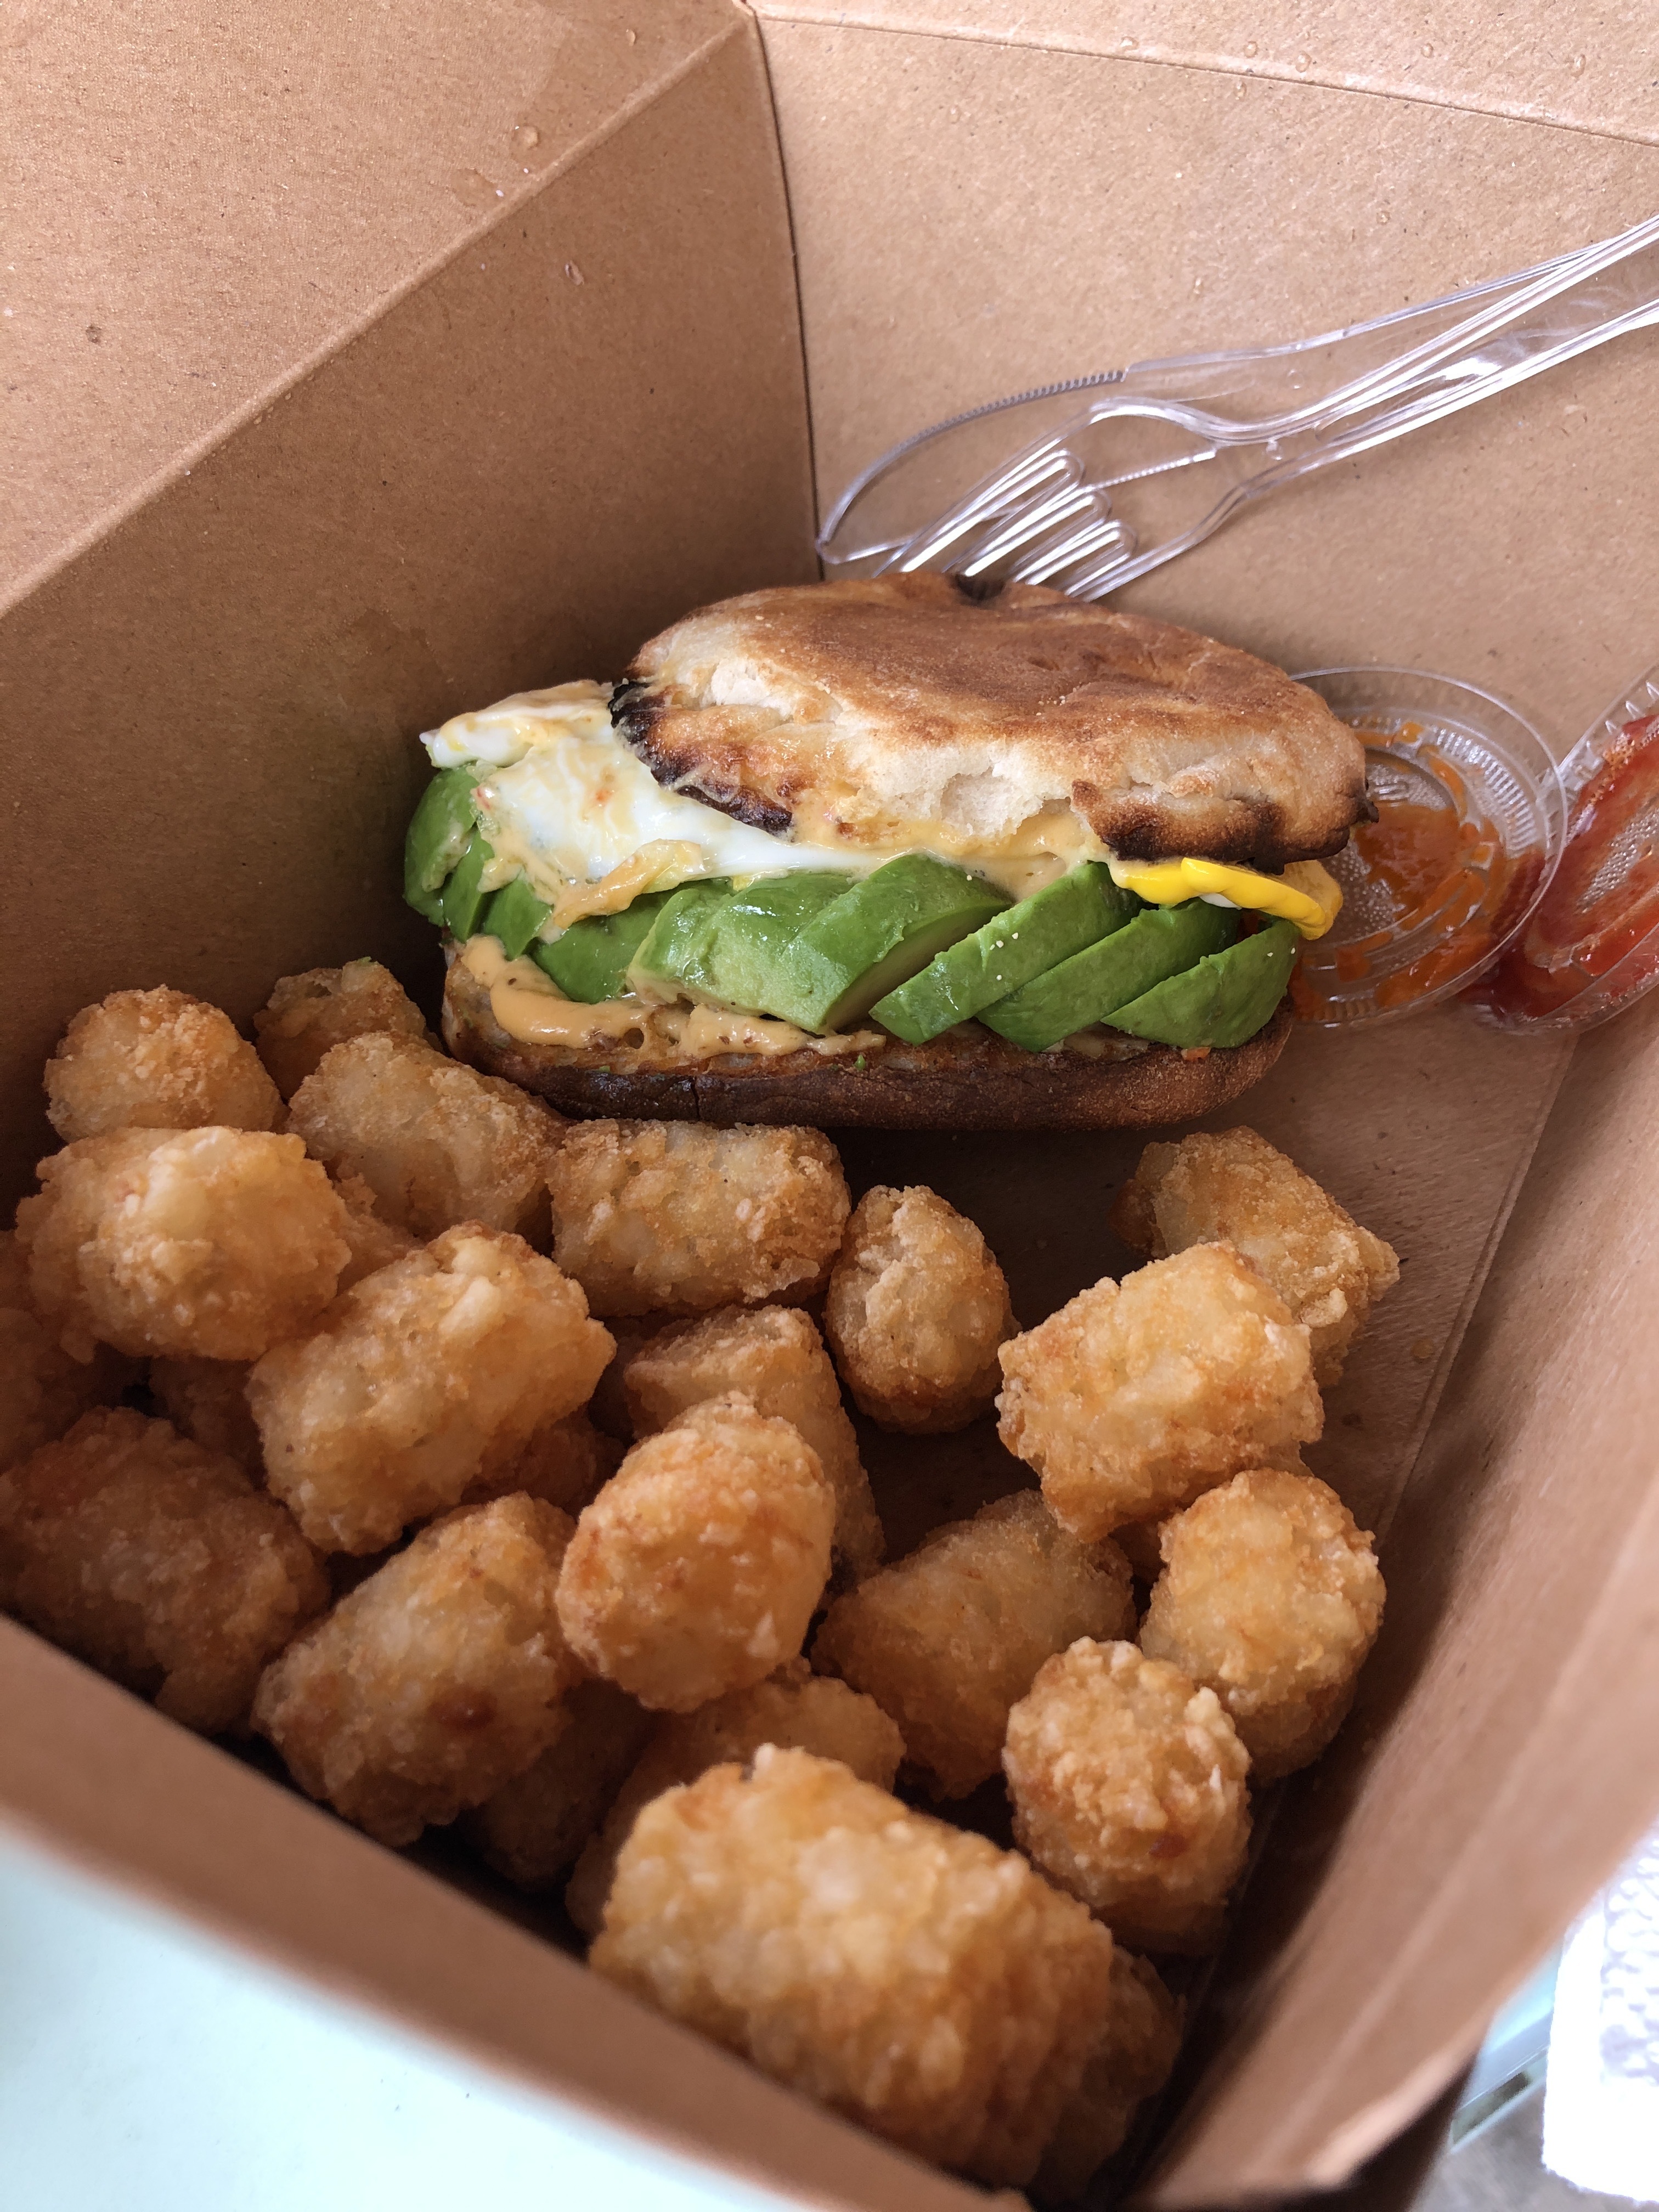 A mound of tater tots surround a breakfast sandwich of avocado and egg on a toasted english muffin 